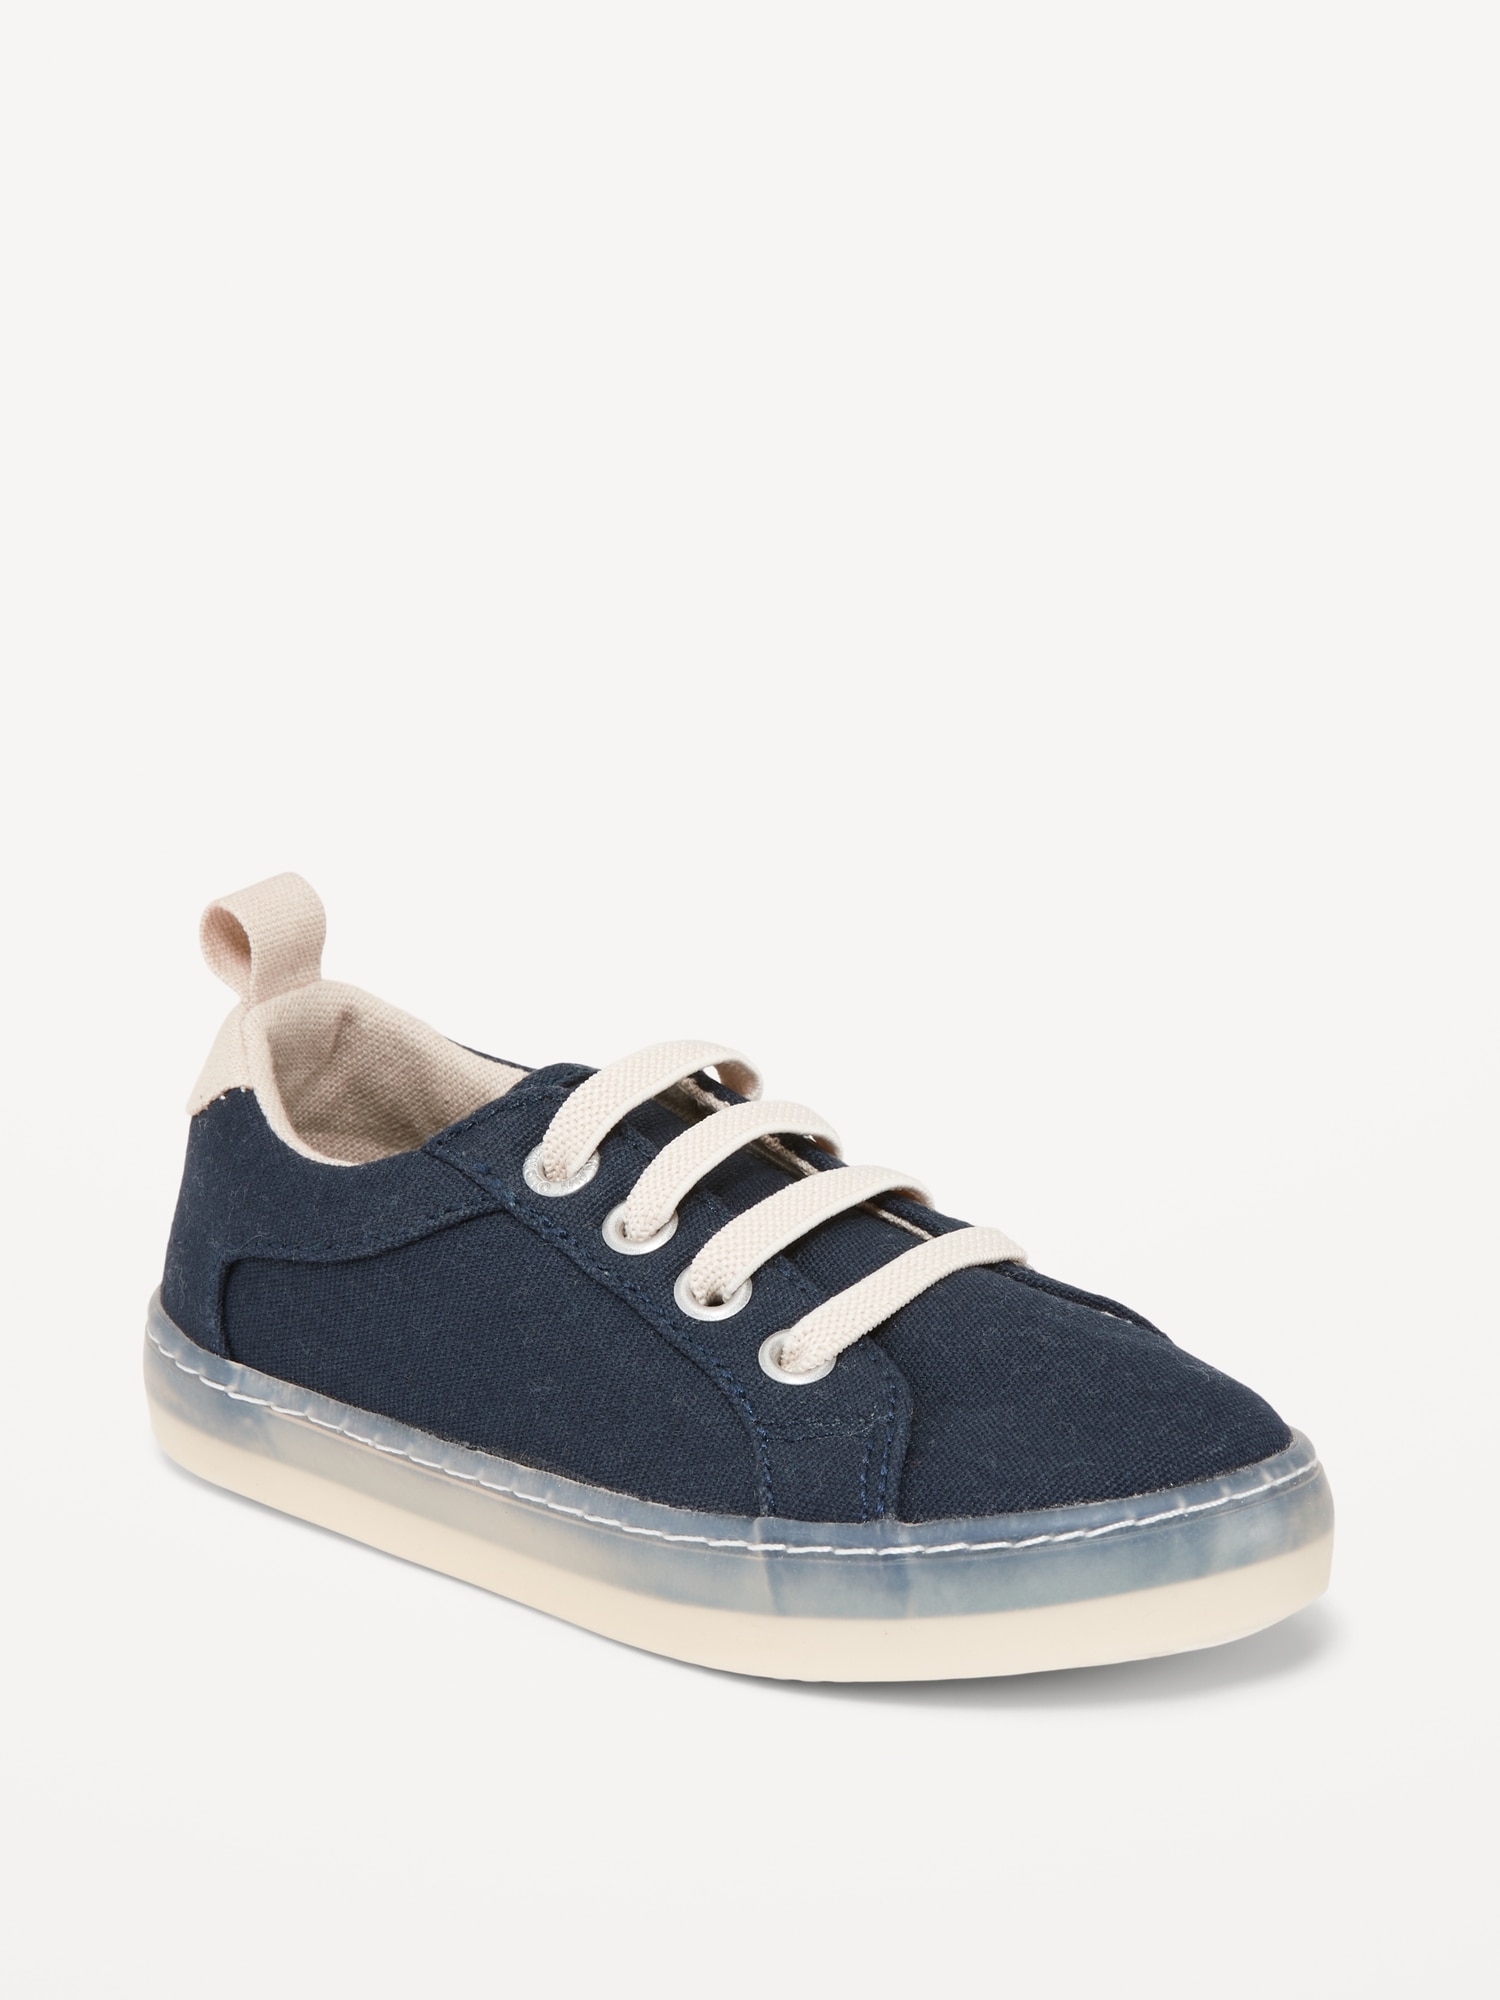 Oldnavy Elastic-Lace Canvas Sneakers for Toddler